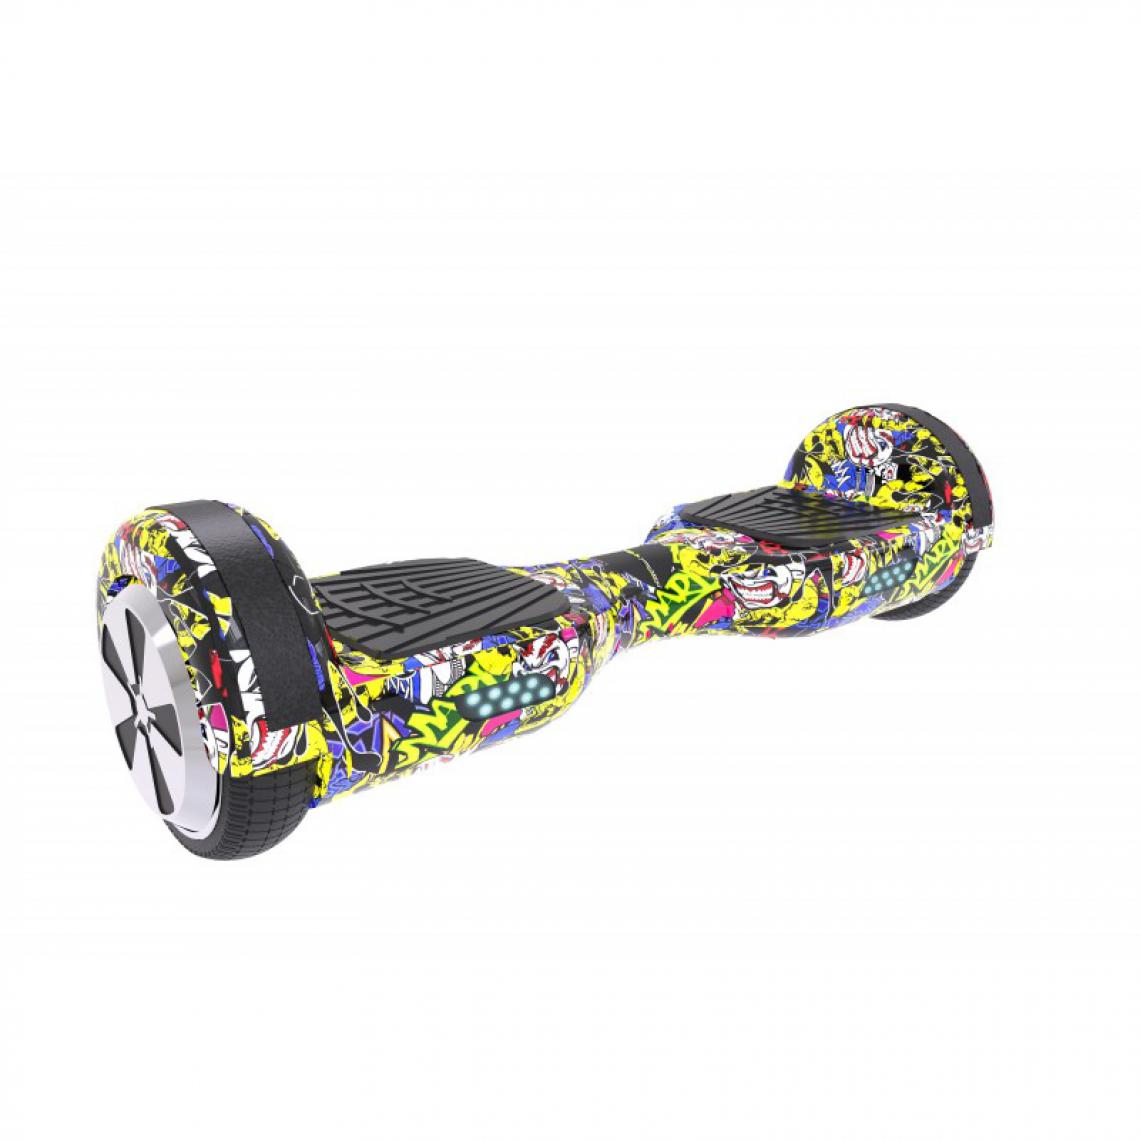 Urbanglide - 65 Lite Hoverboard Roues 6,5" 550W 4Ah - Gyropode